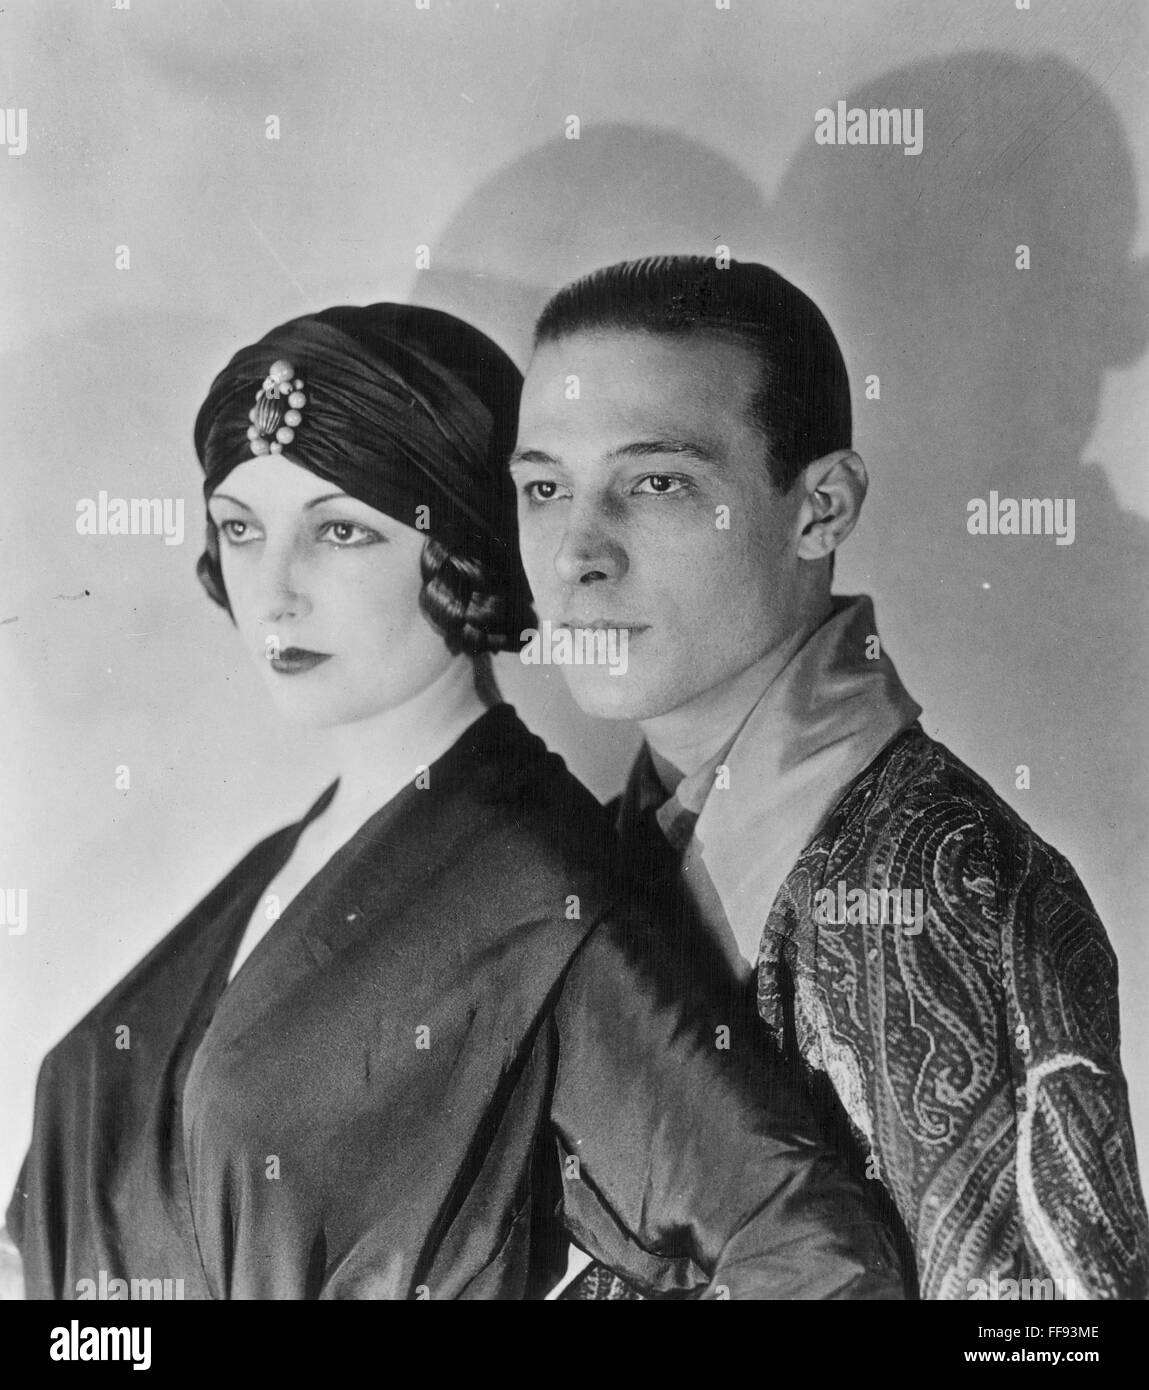 RUDOLPH VALENTINO /n(1895-1926). American (Italian-born) film actor. With his wife, actress and costume designer Natacha Rambova (nΘe Winifred in the 1920s Stock Photo - Alamy